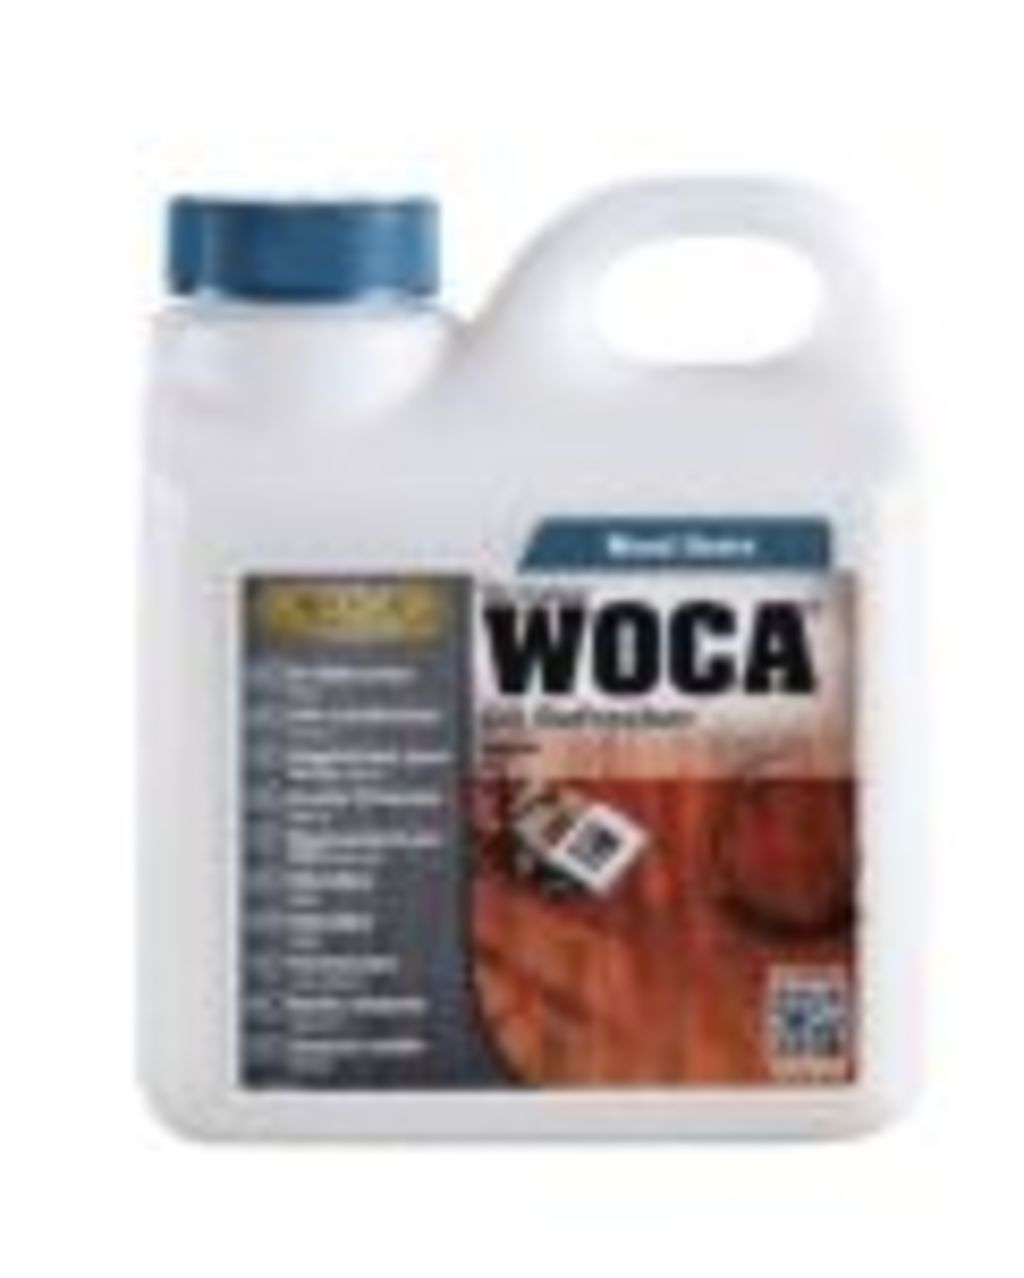 WOCA Oil Refresher Natural For Oiled Wood Floor